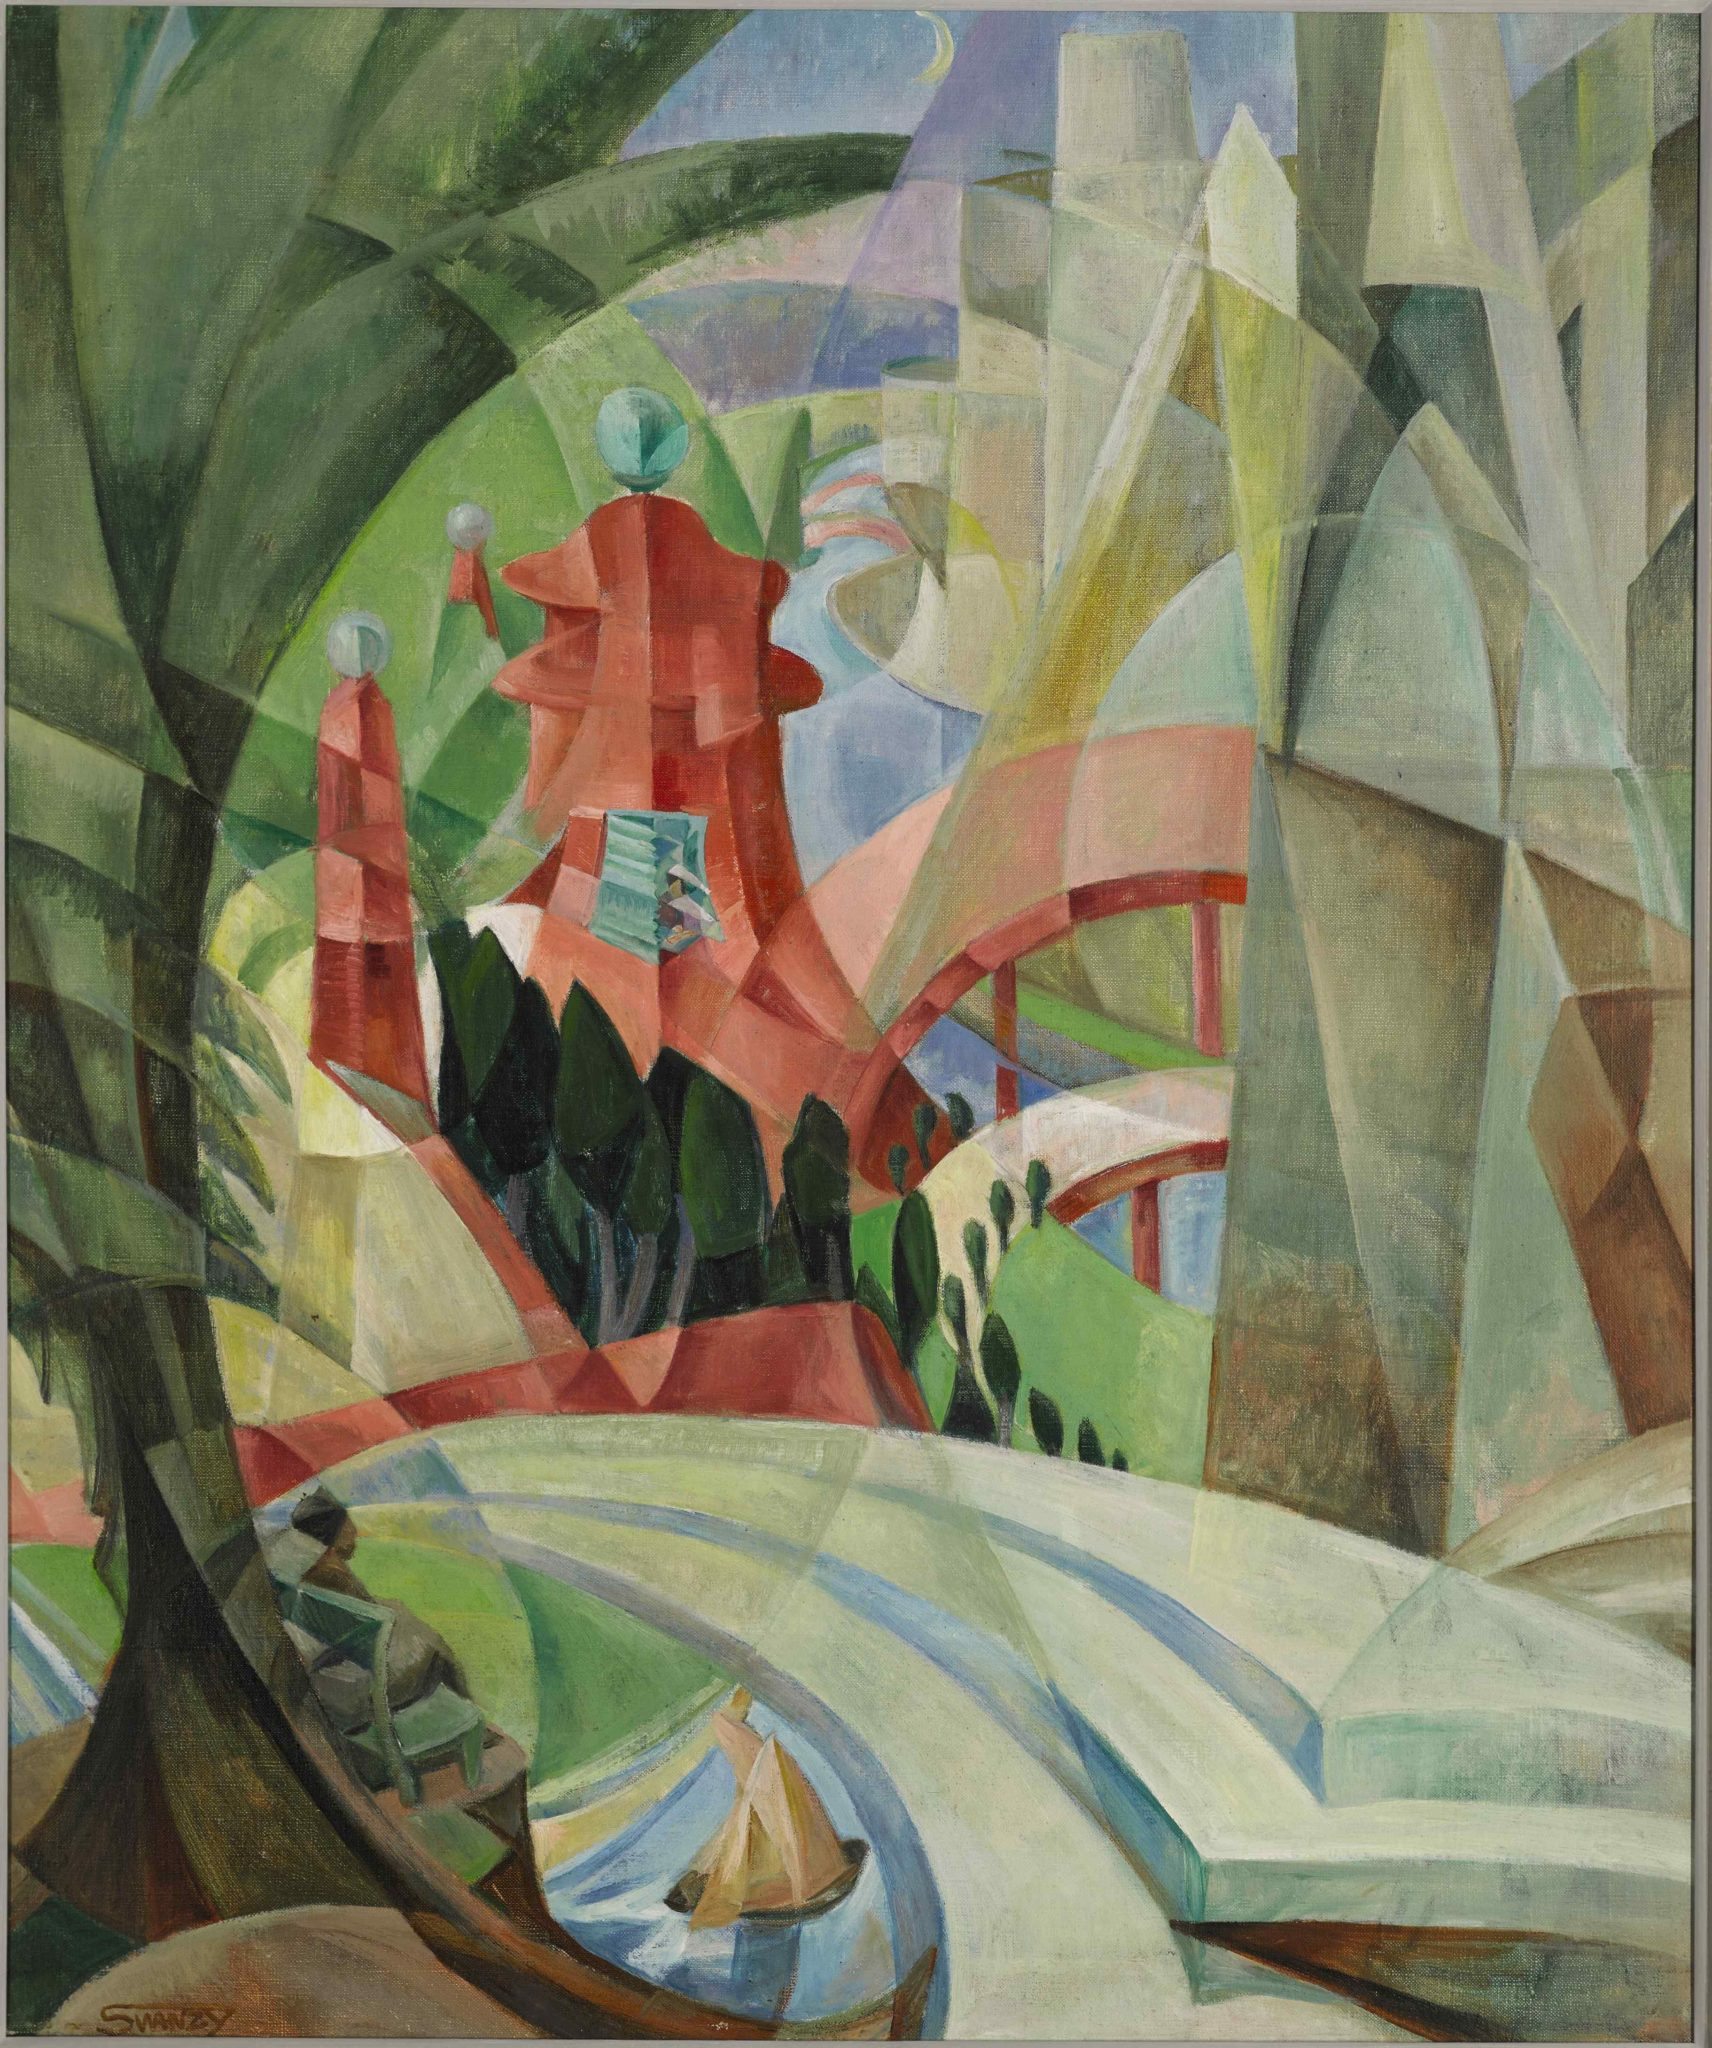 Cubist Landscape with Red Pagoda and Bridge